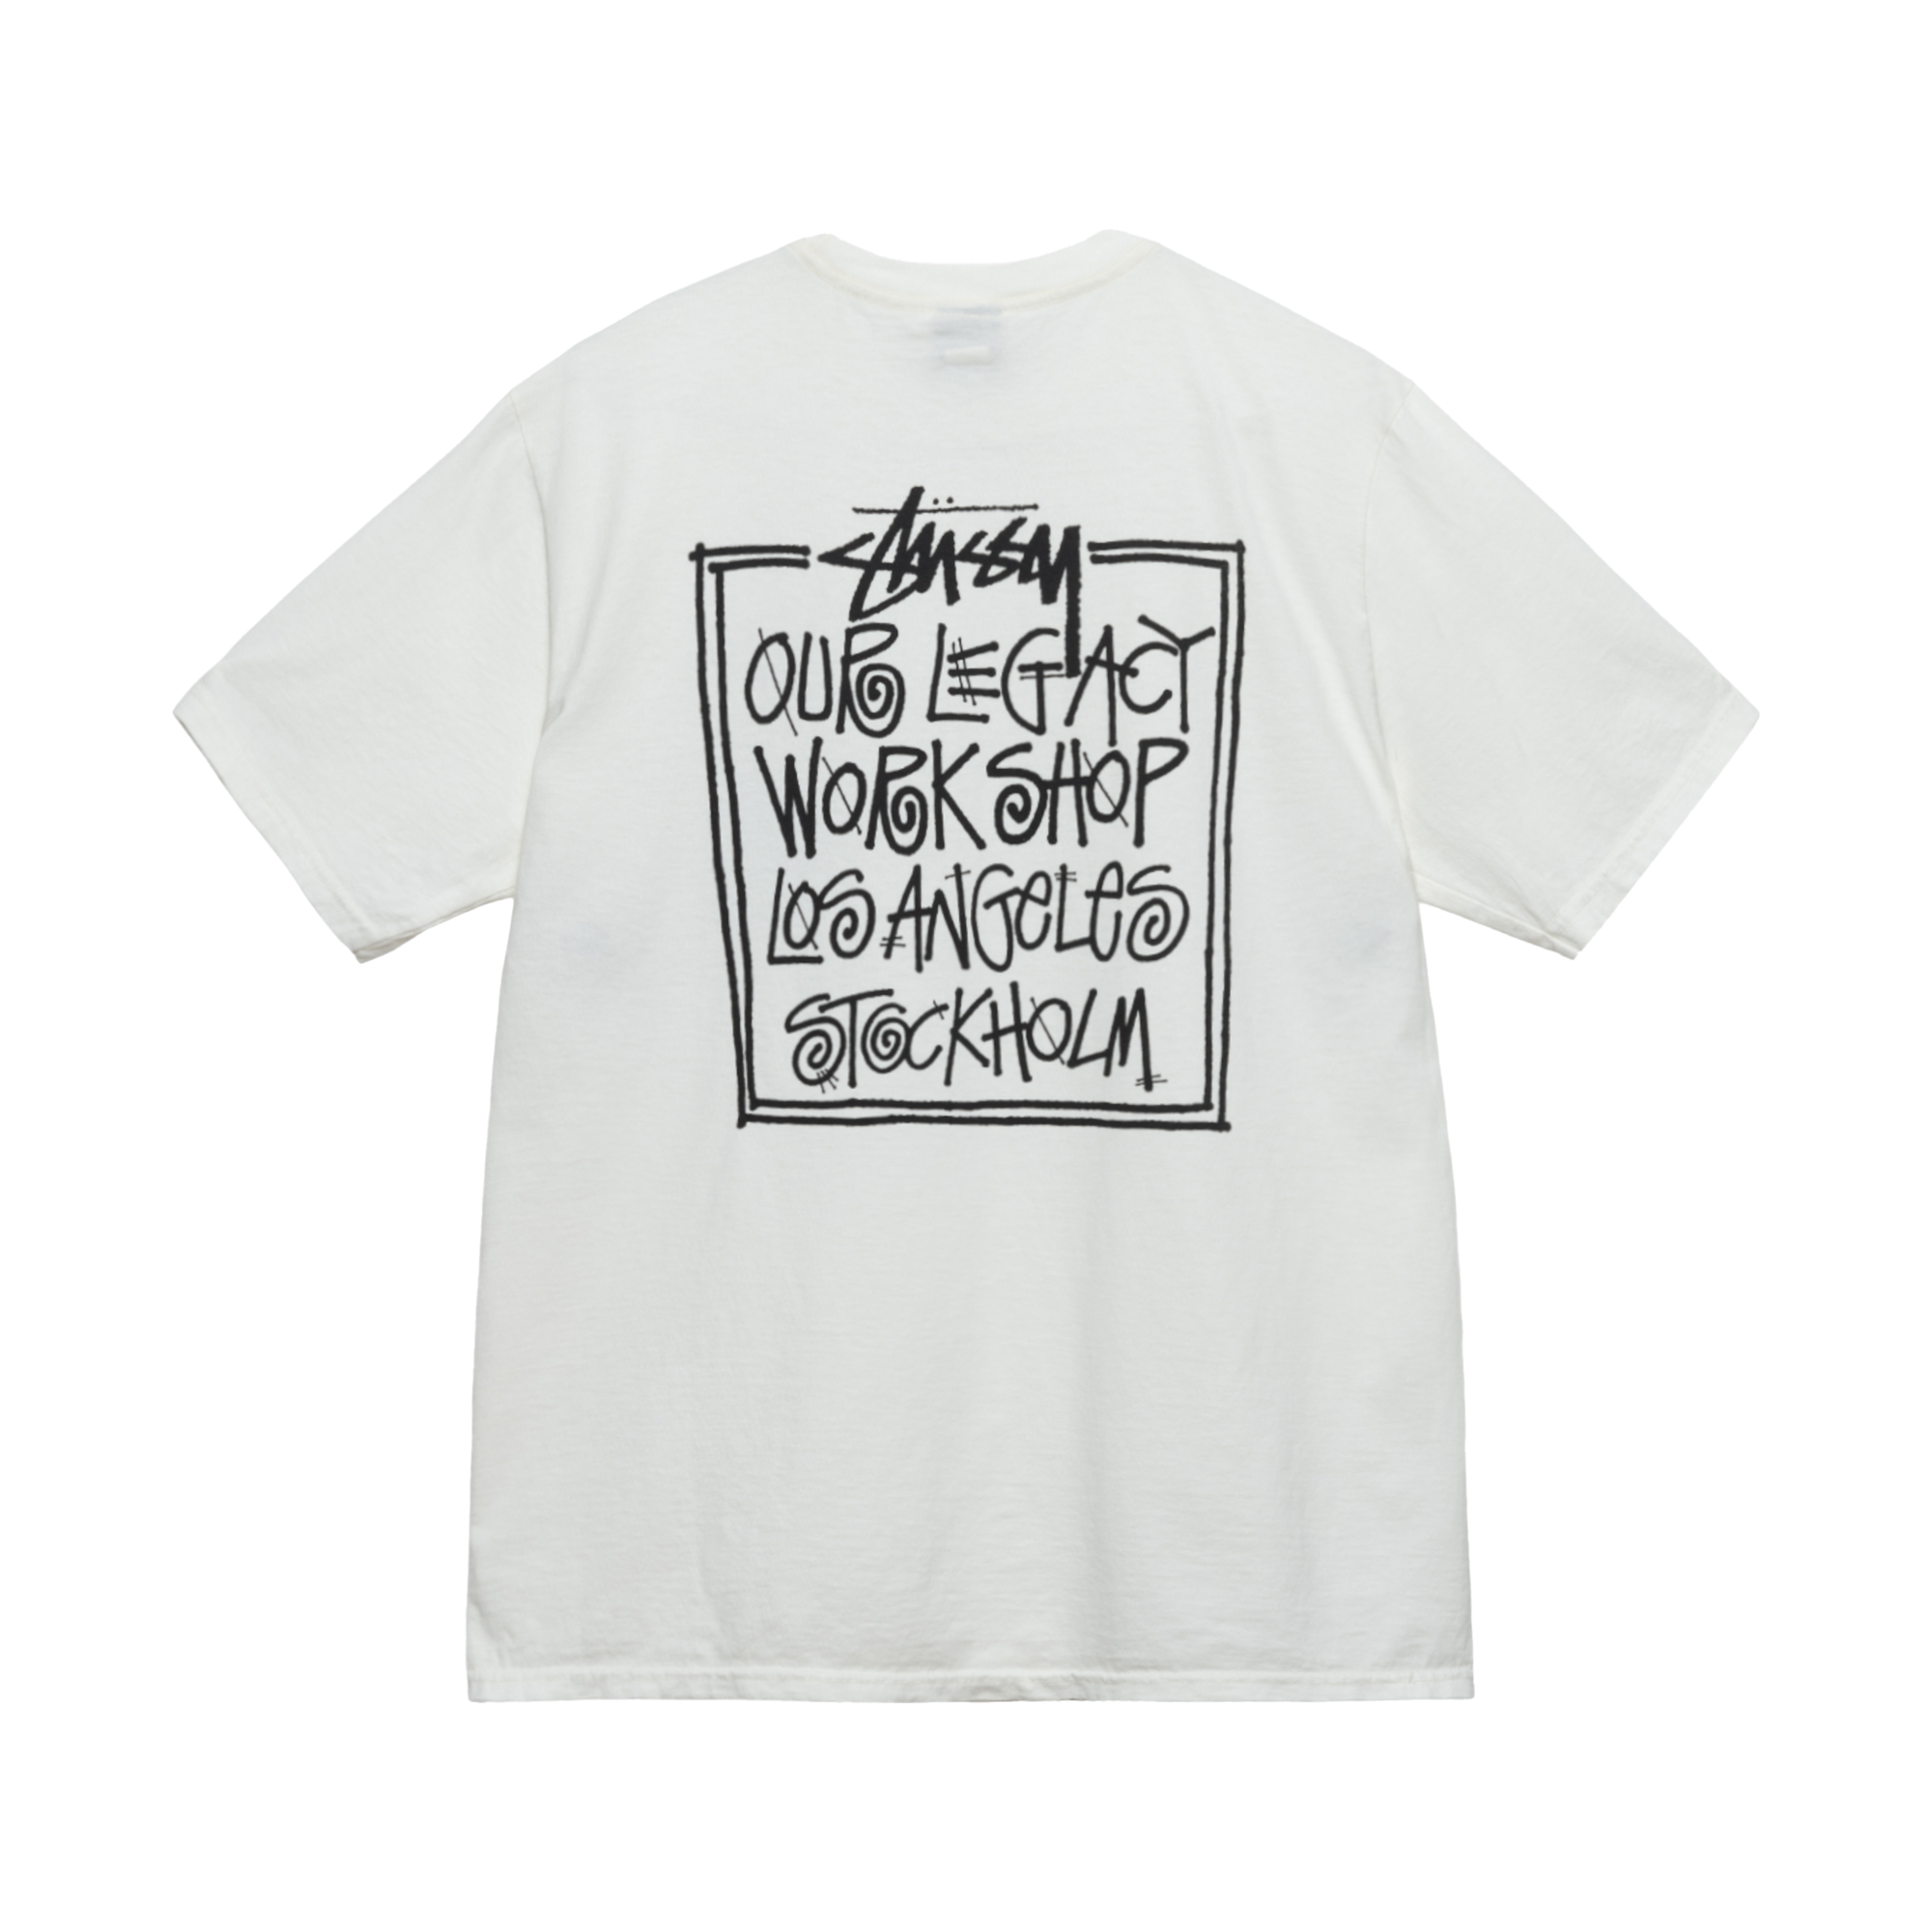 STUSSY OUR LEGACY FRAME PIGMENT TEE 黒 M